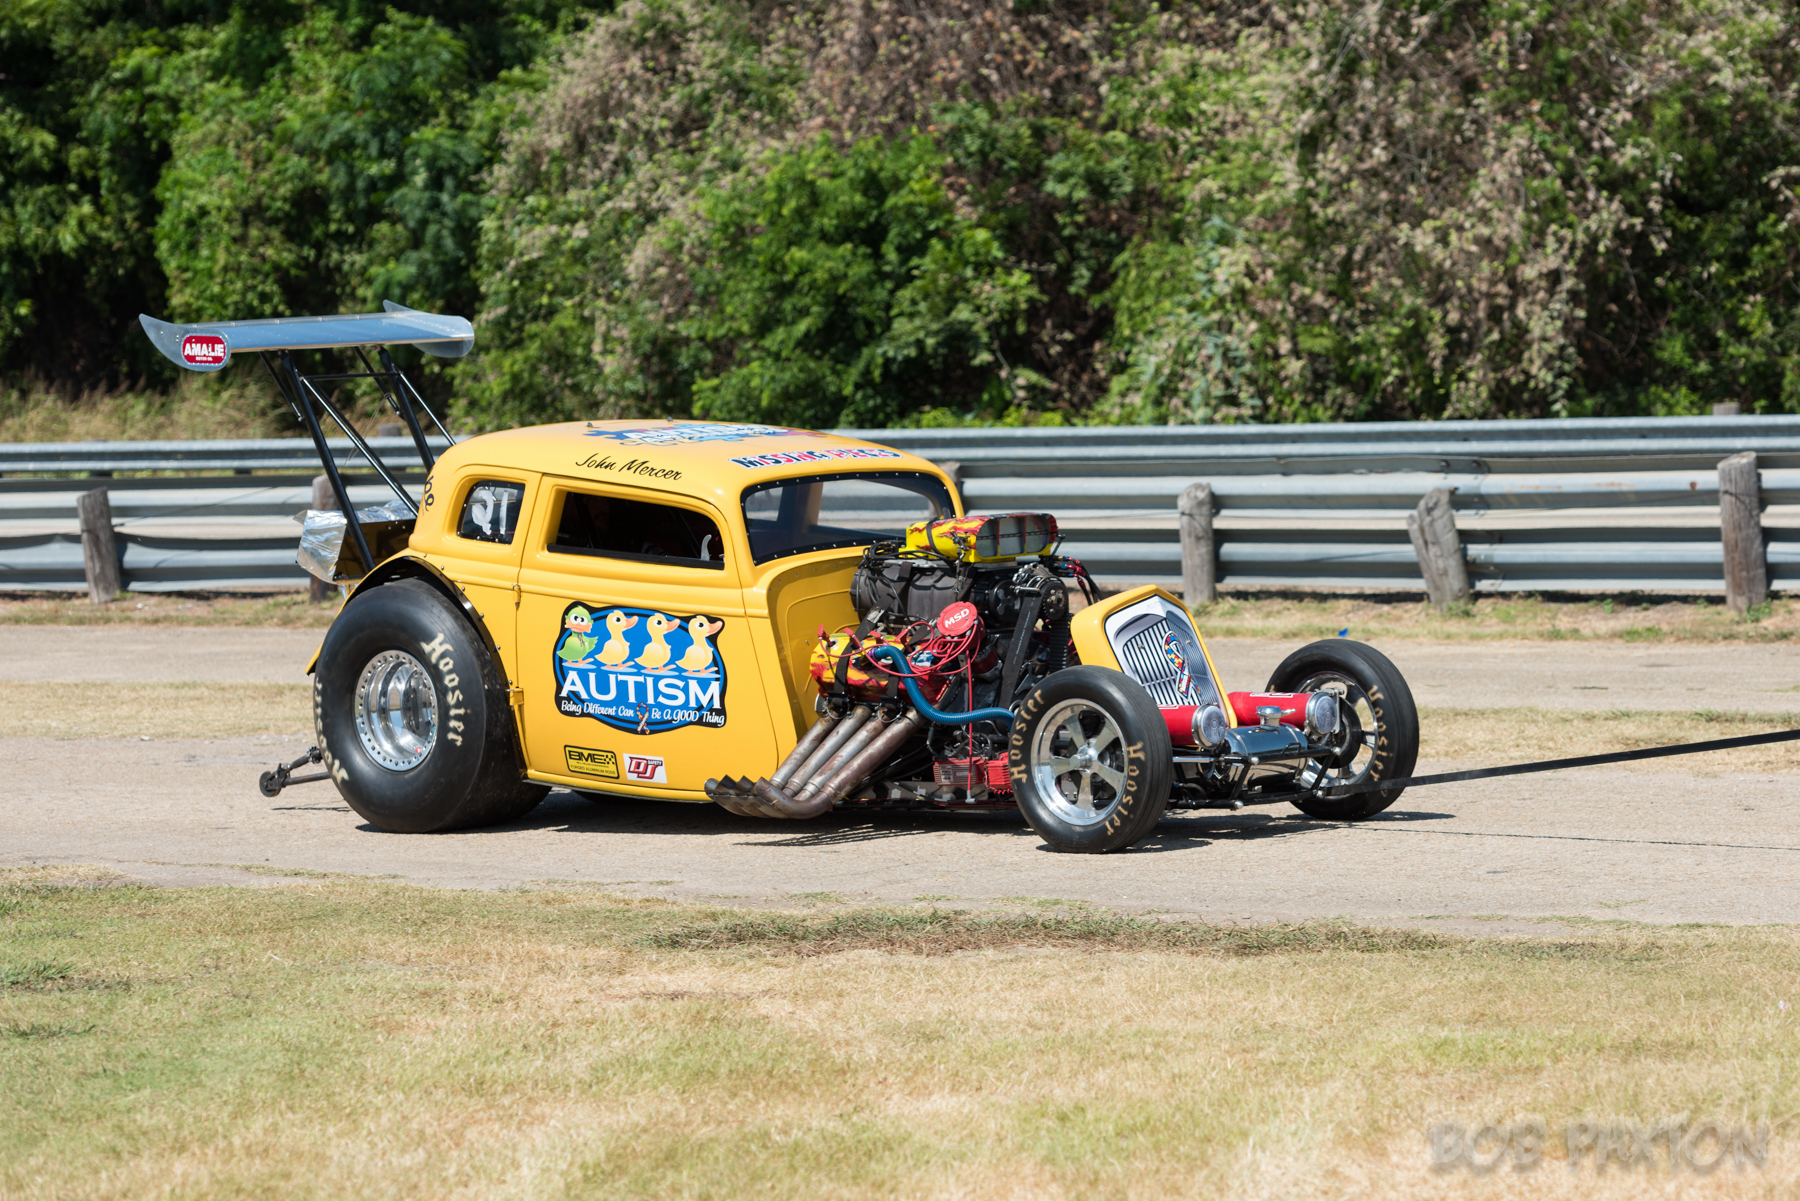 Day Of The Drags 2015: Killer Historic Drag Racing At Little River Drag Strip